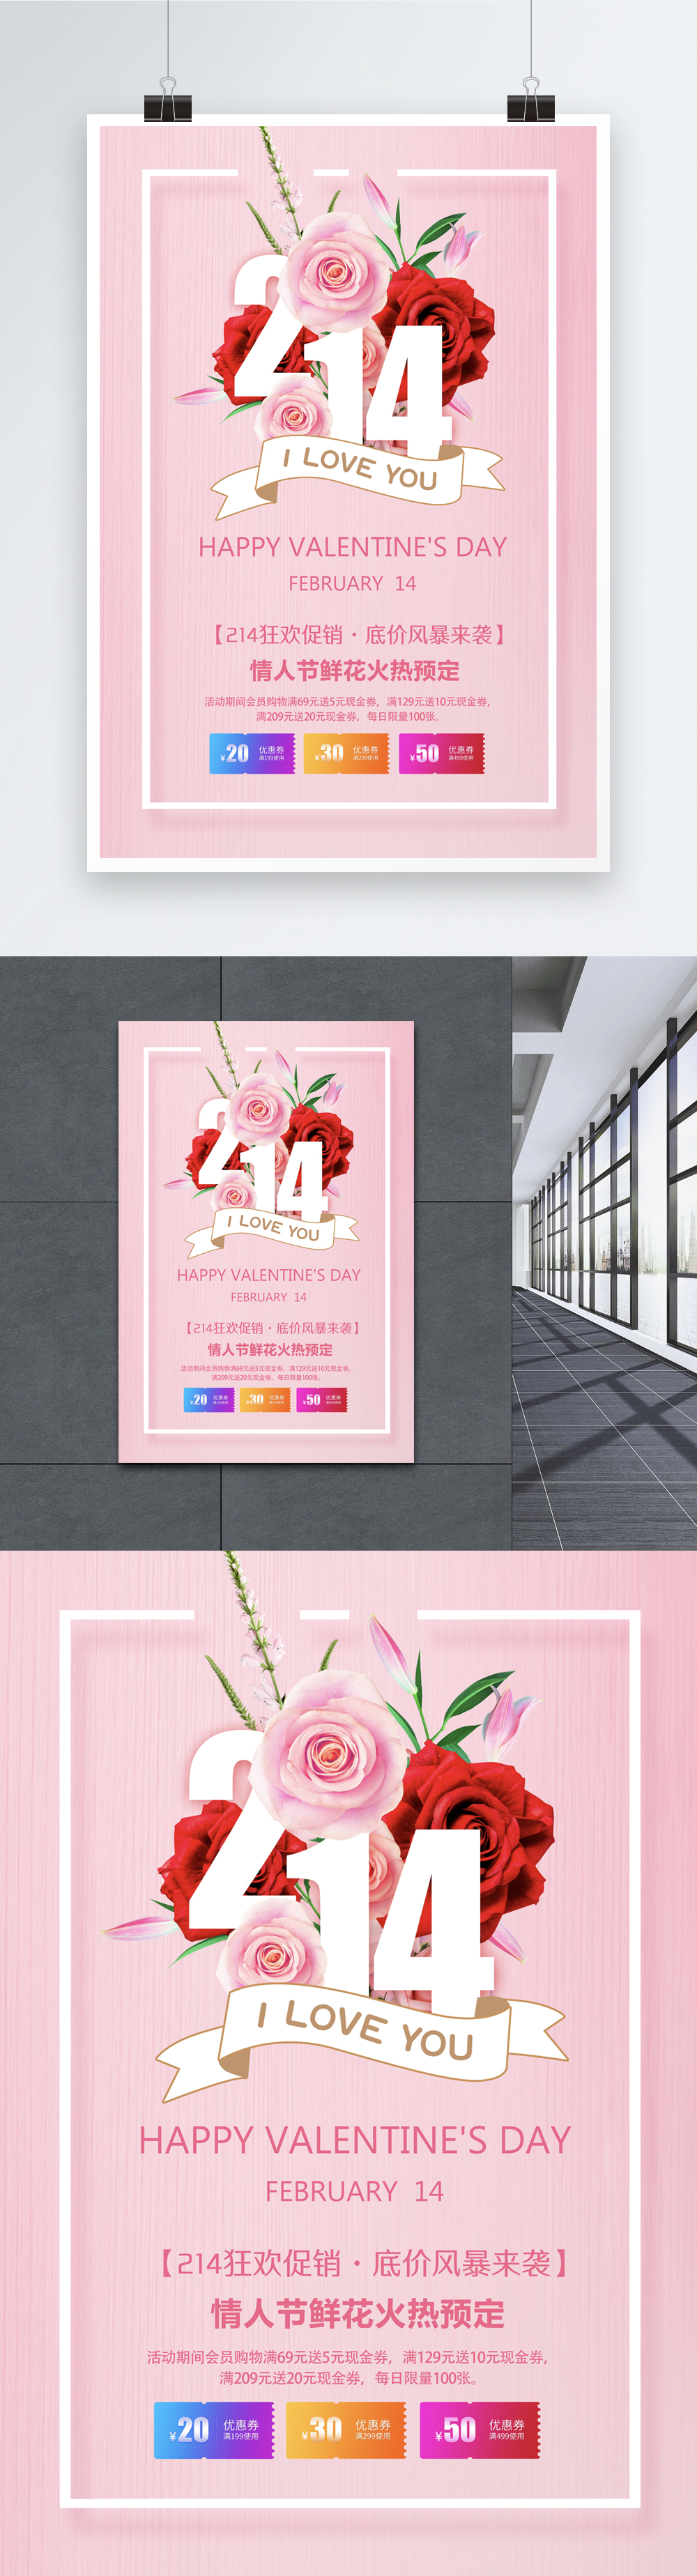 Pink 214 creative valentines day poster template image_picture free ...